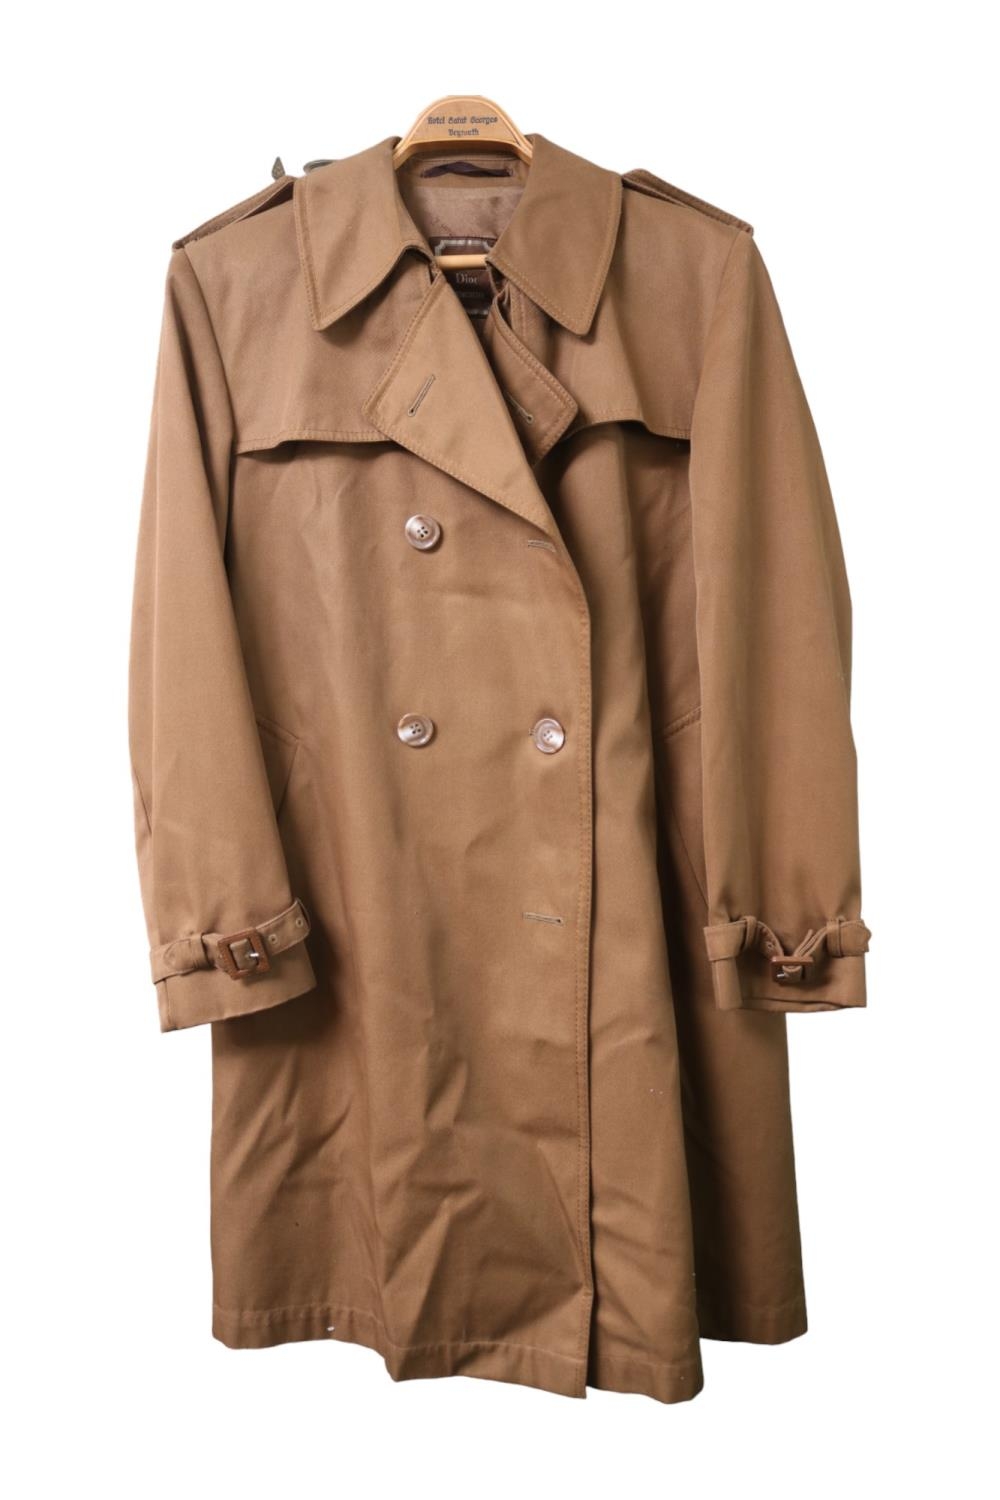 Christian Dior Monsieur Brown Trench Coat Mac retailed by Stoffels Small to medium size